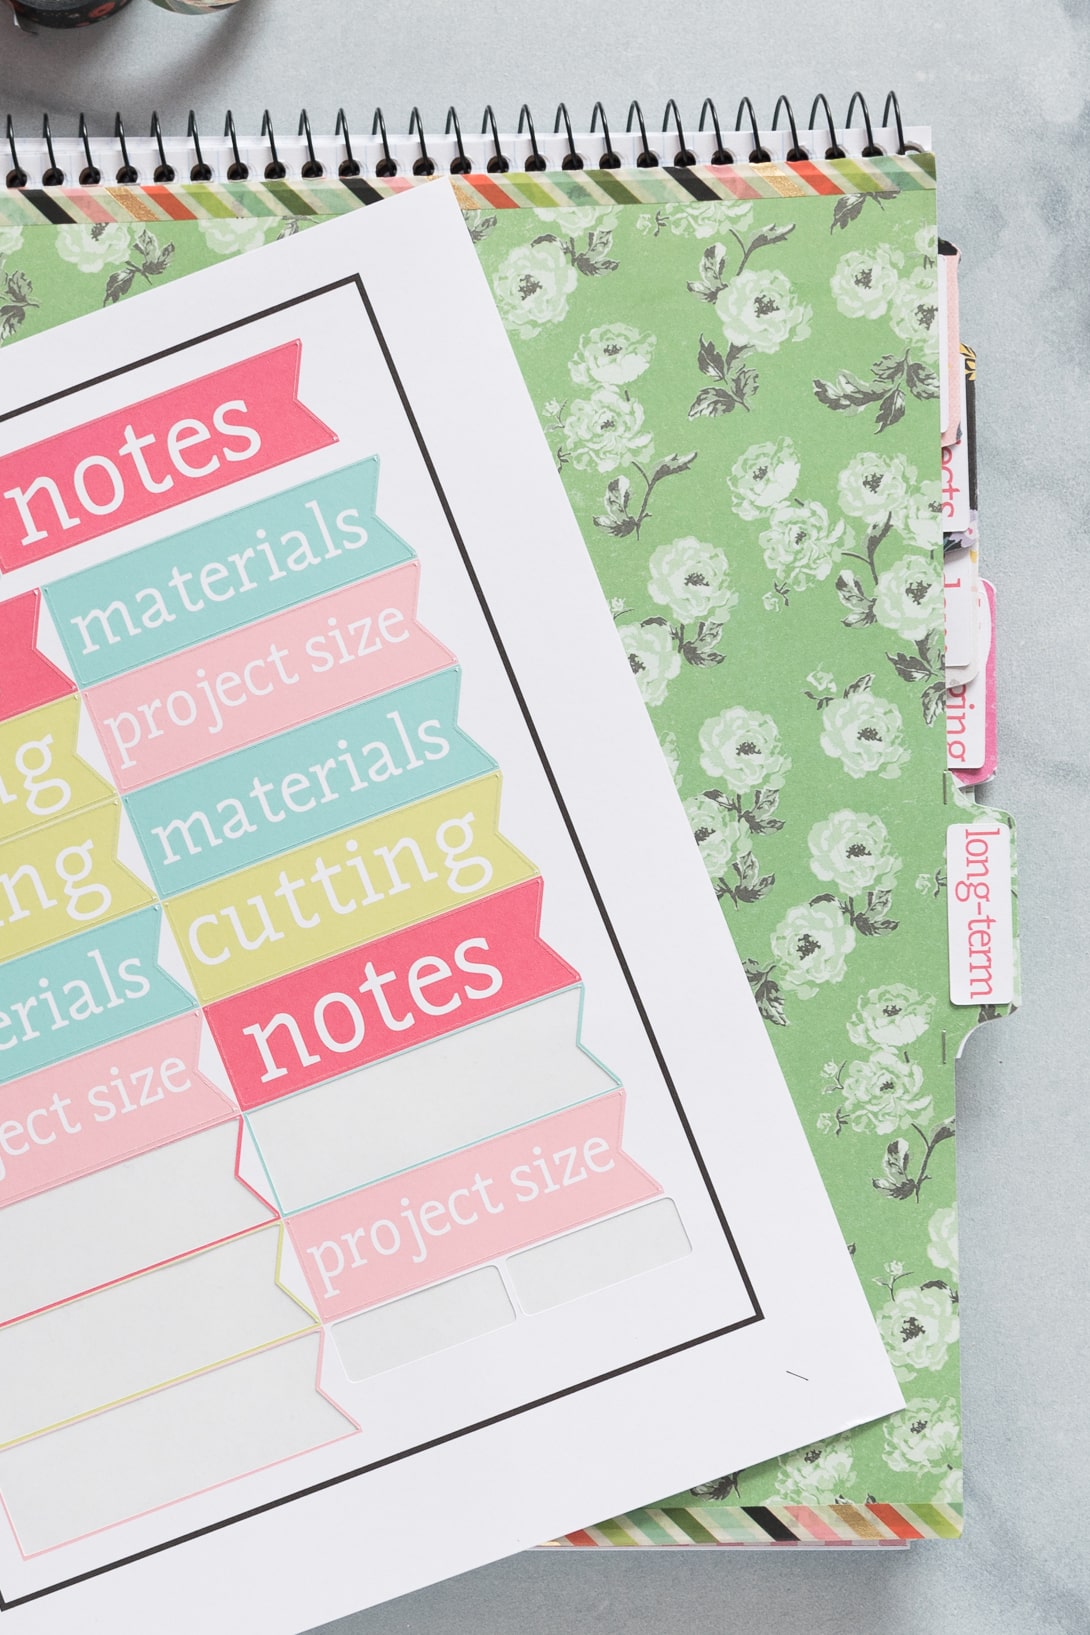 How to make a sewing and quilting planner, including how to make planner stickers using a Cricut print and cut feature. DIY Planner ideas! #projectplanner #diyplanner #diyplannerstickers #quiltplanner #diyquiltplanner #cricutmade